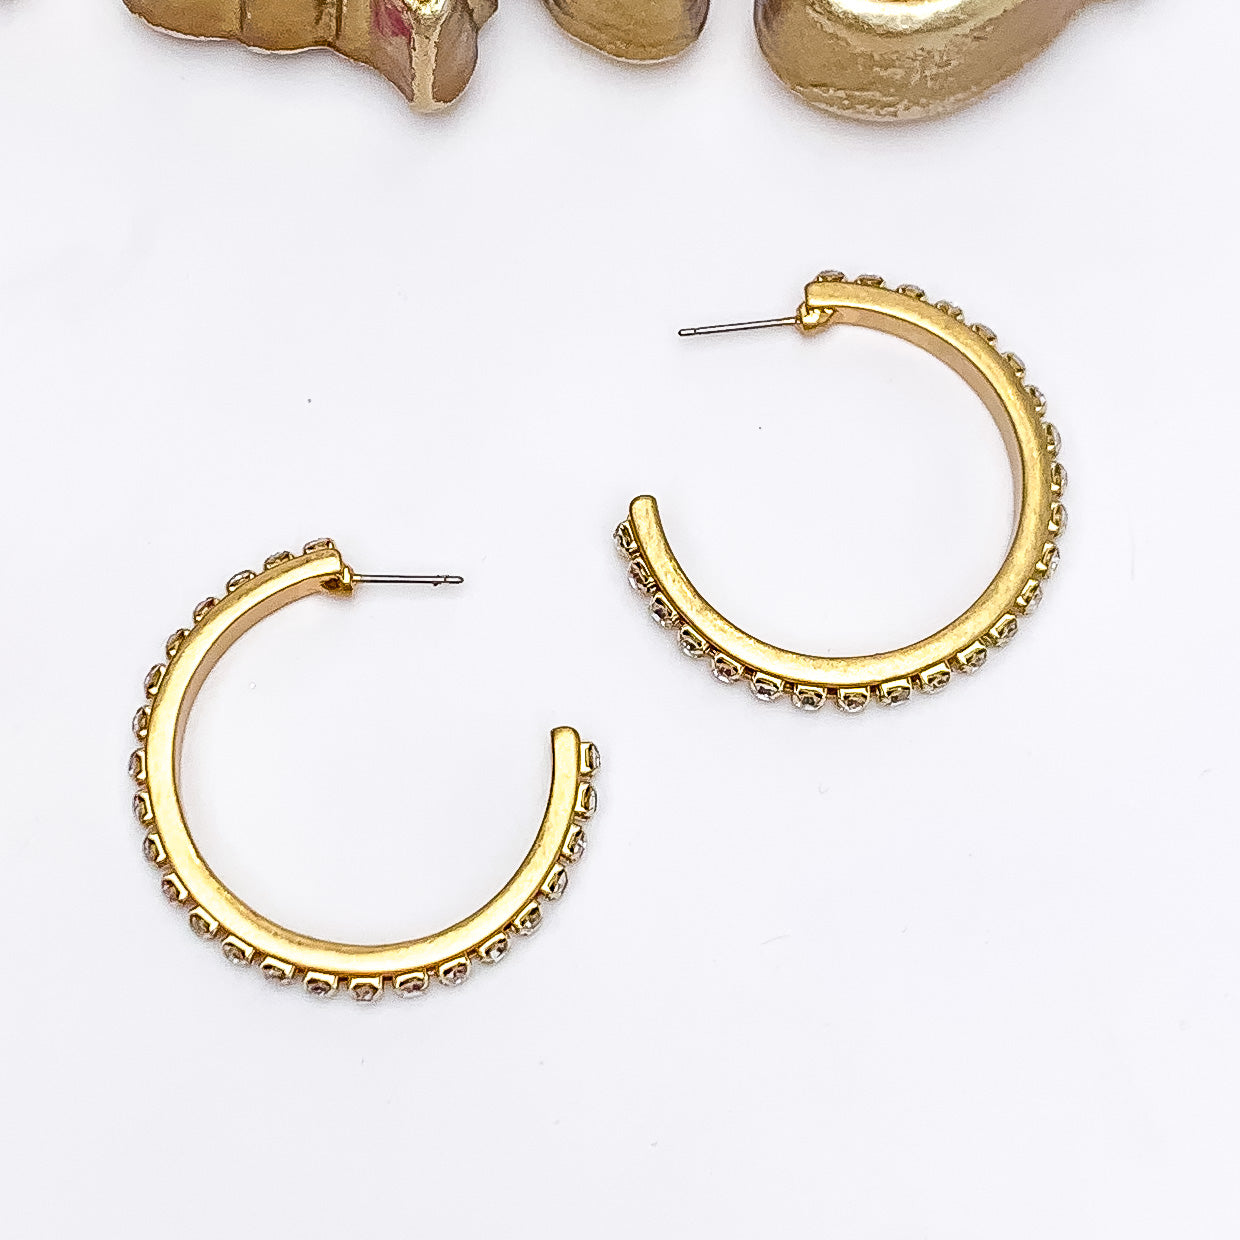 City Nights Gold Tone Hoop Earrings With Inlaid Clear Crystals - Giddy Up Glamour Boutique